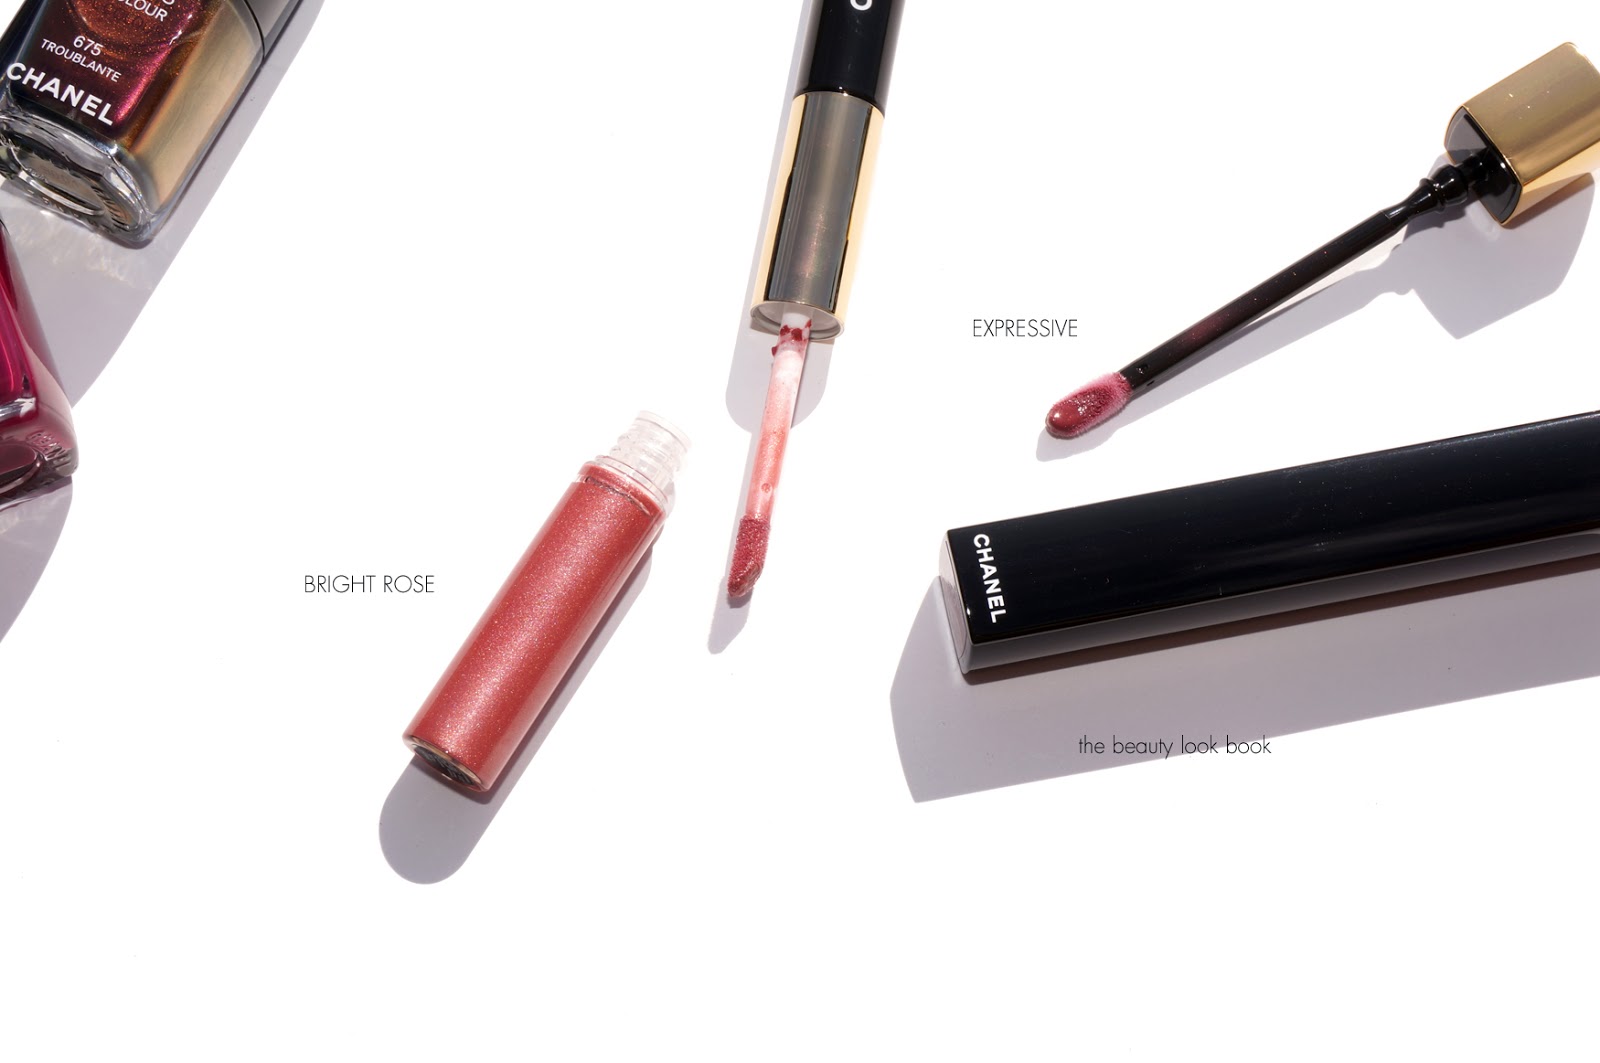 Chanel Sensuel (11) Rouge Allure Gloss Review & Swatches